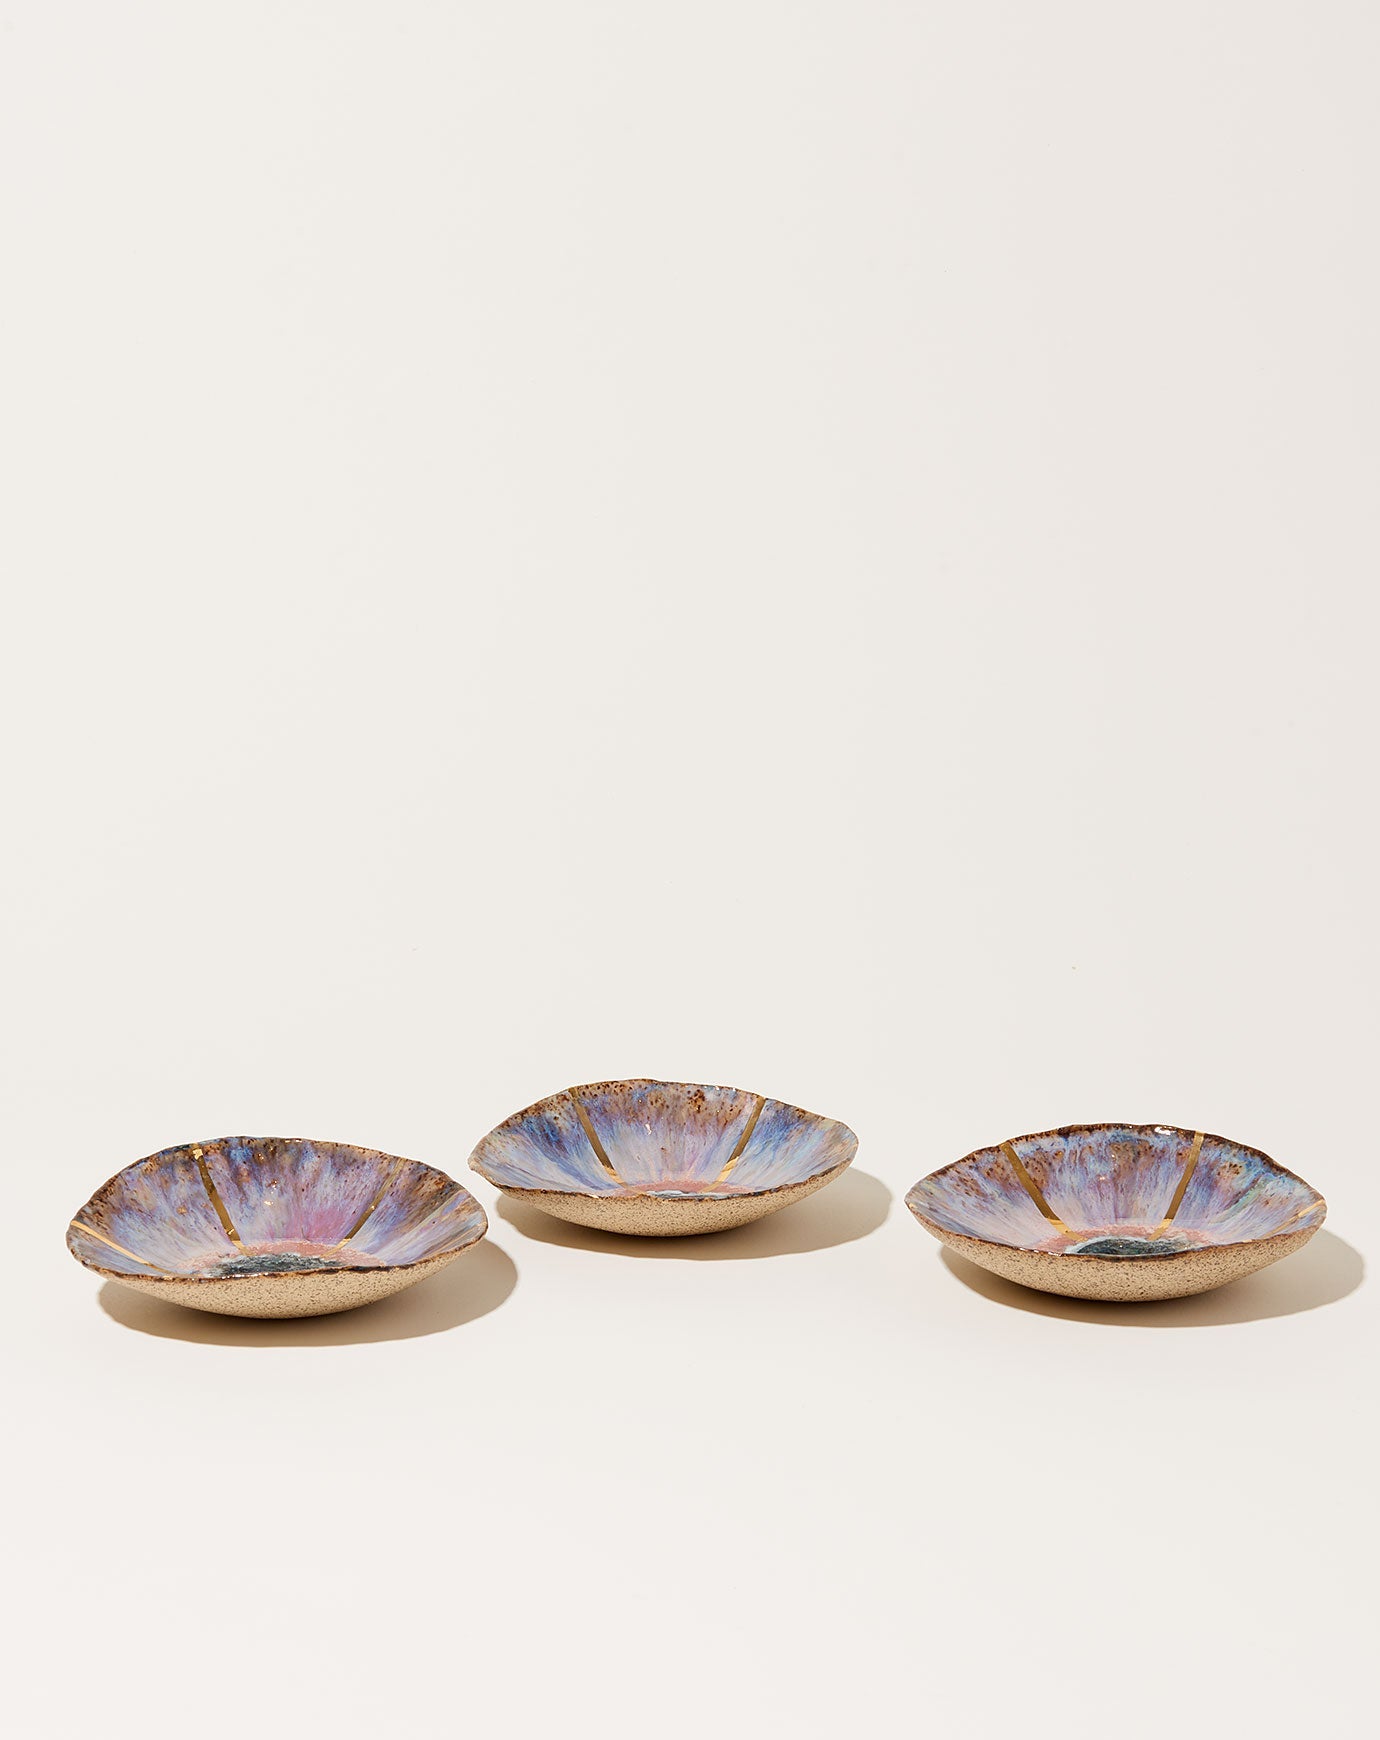 Minh Singer Small Dish in Lavender with Gold Rays